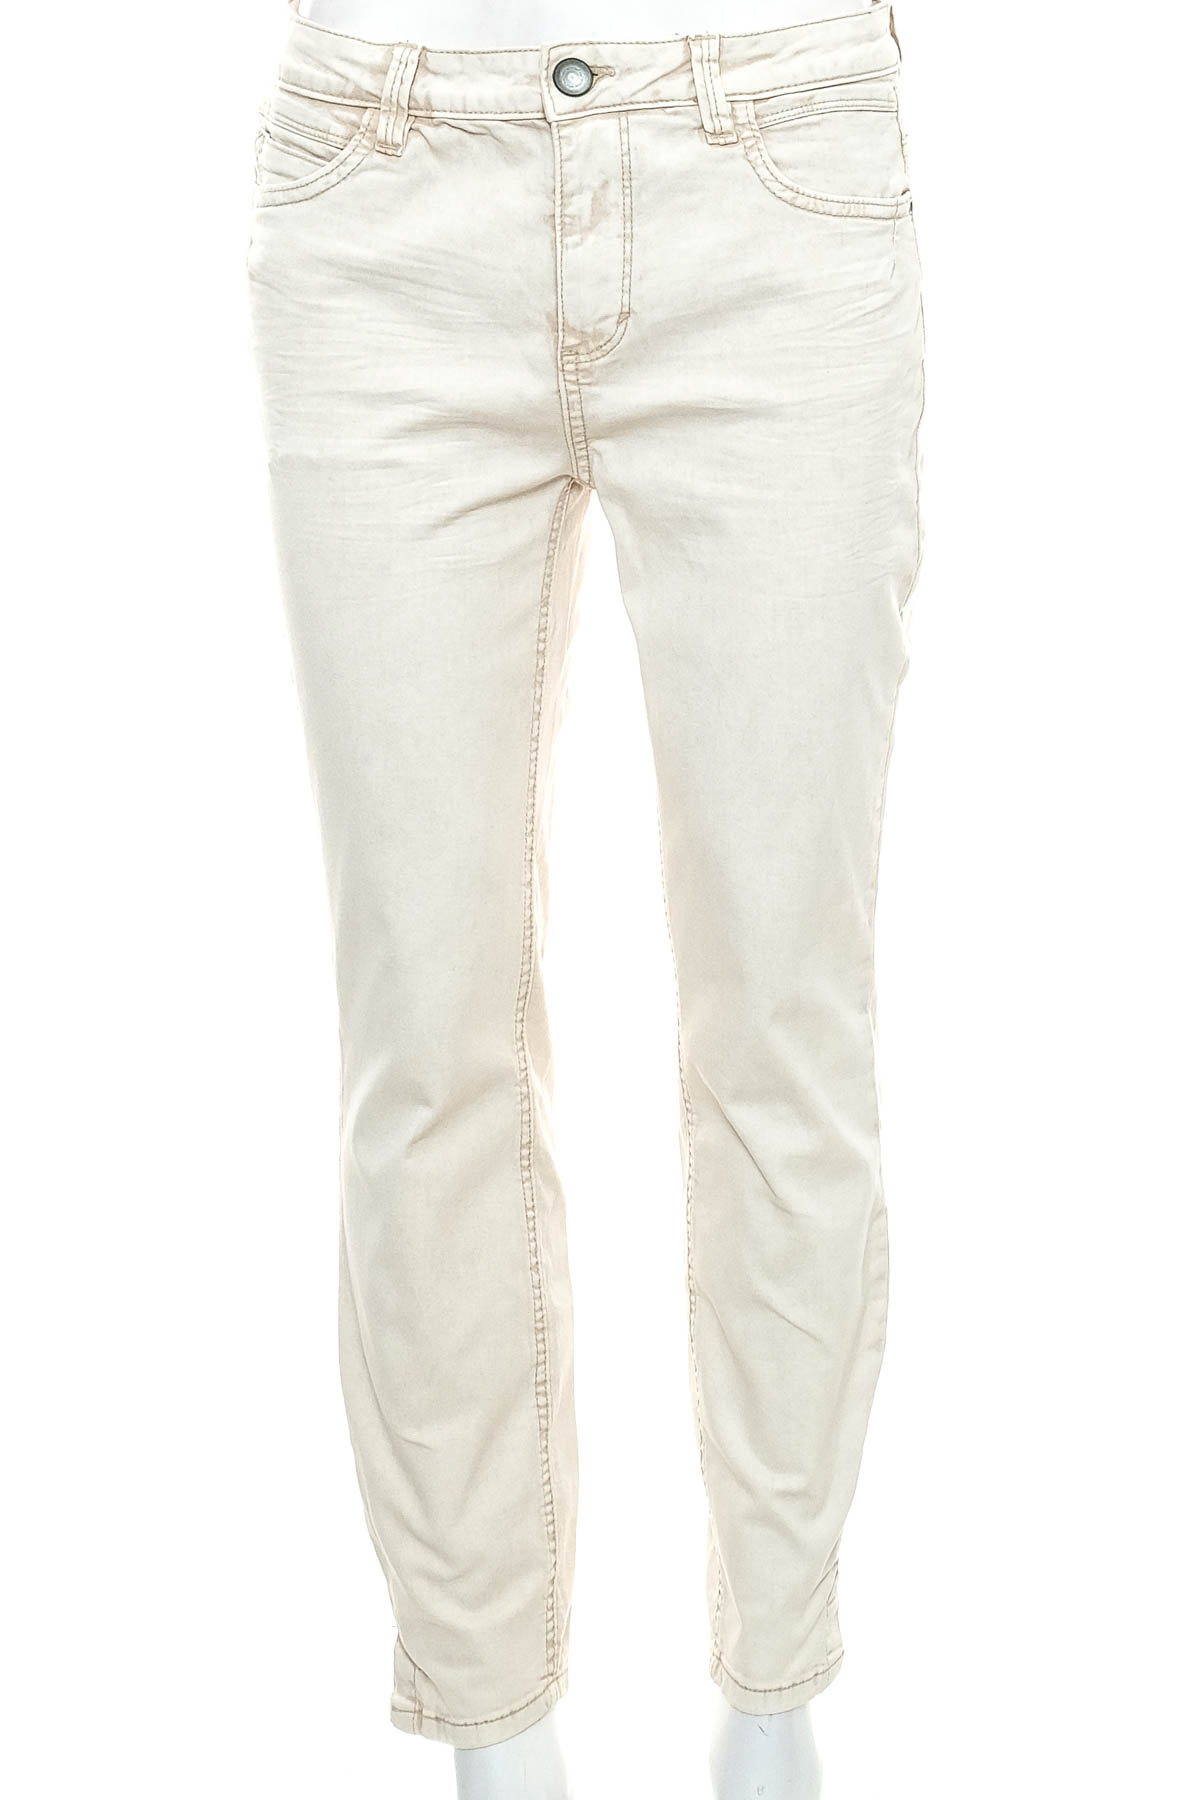 Women's trousers - TOM TAILOR - 0